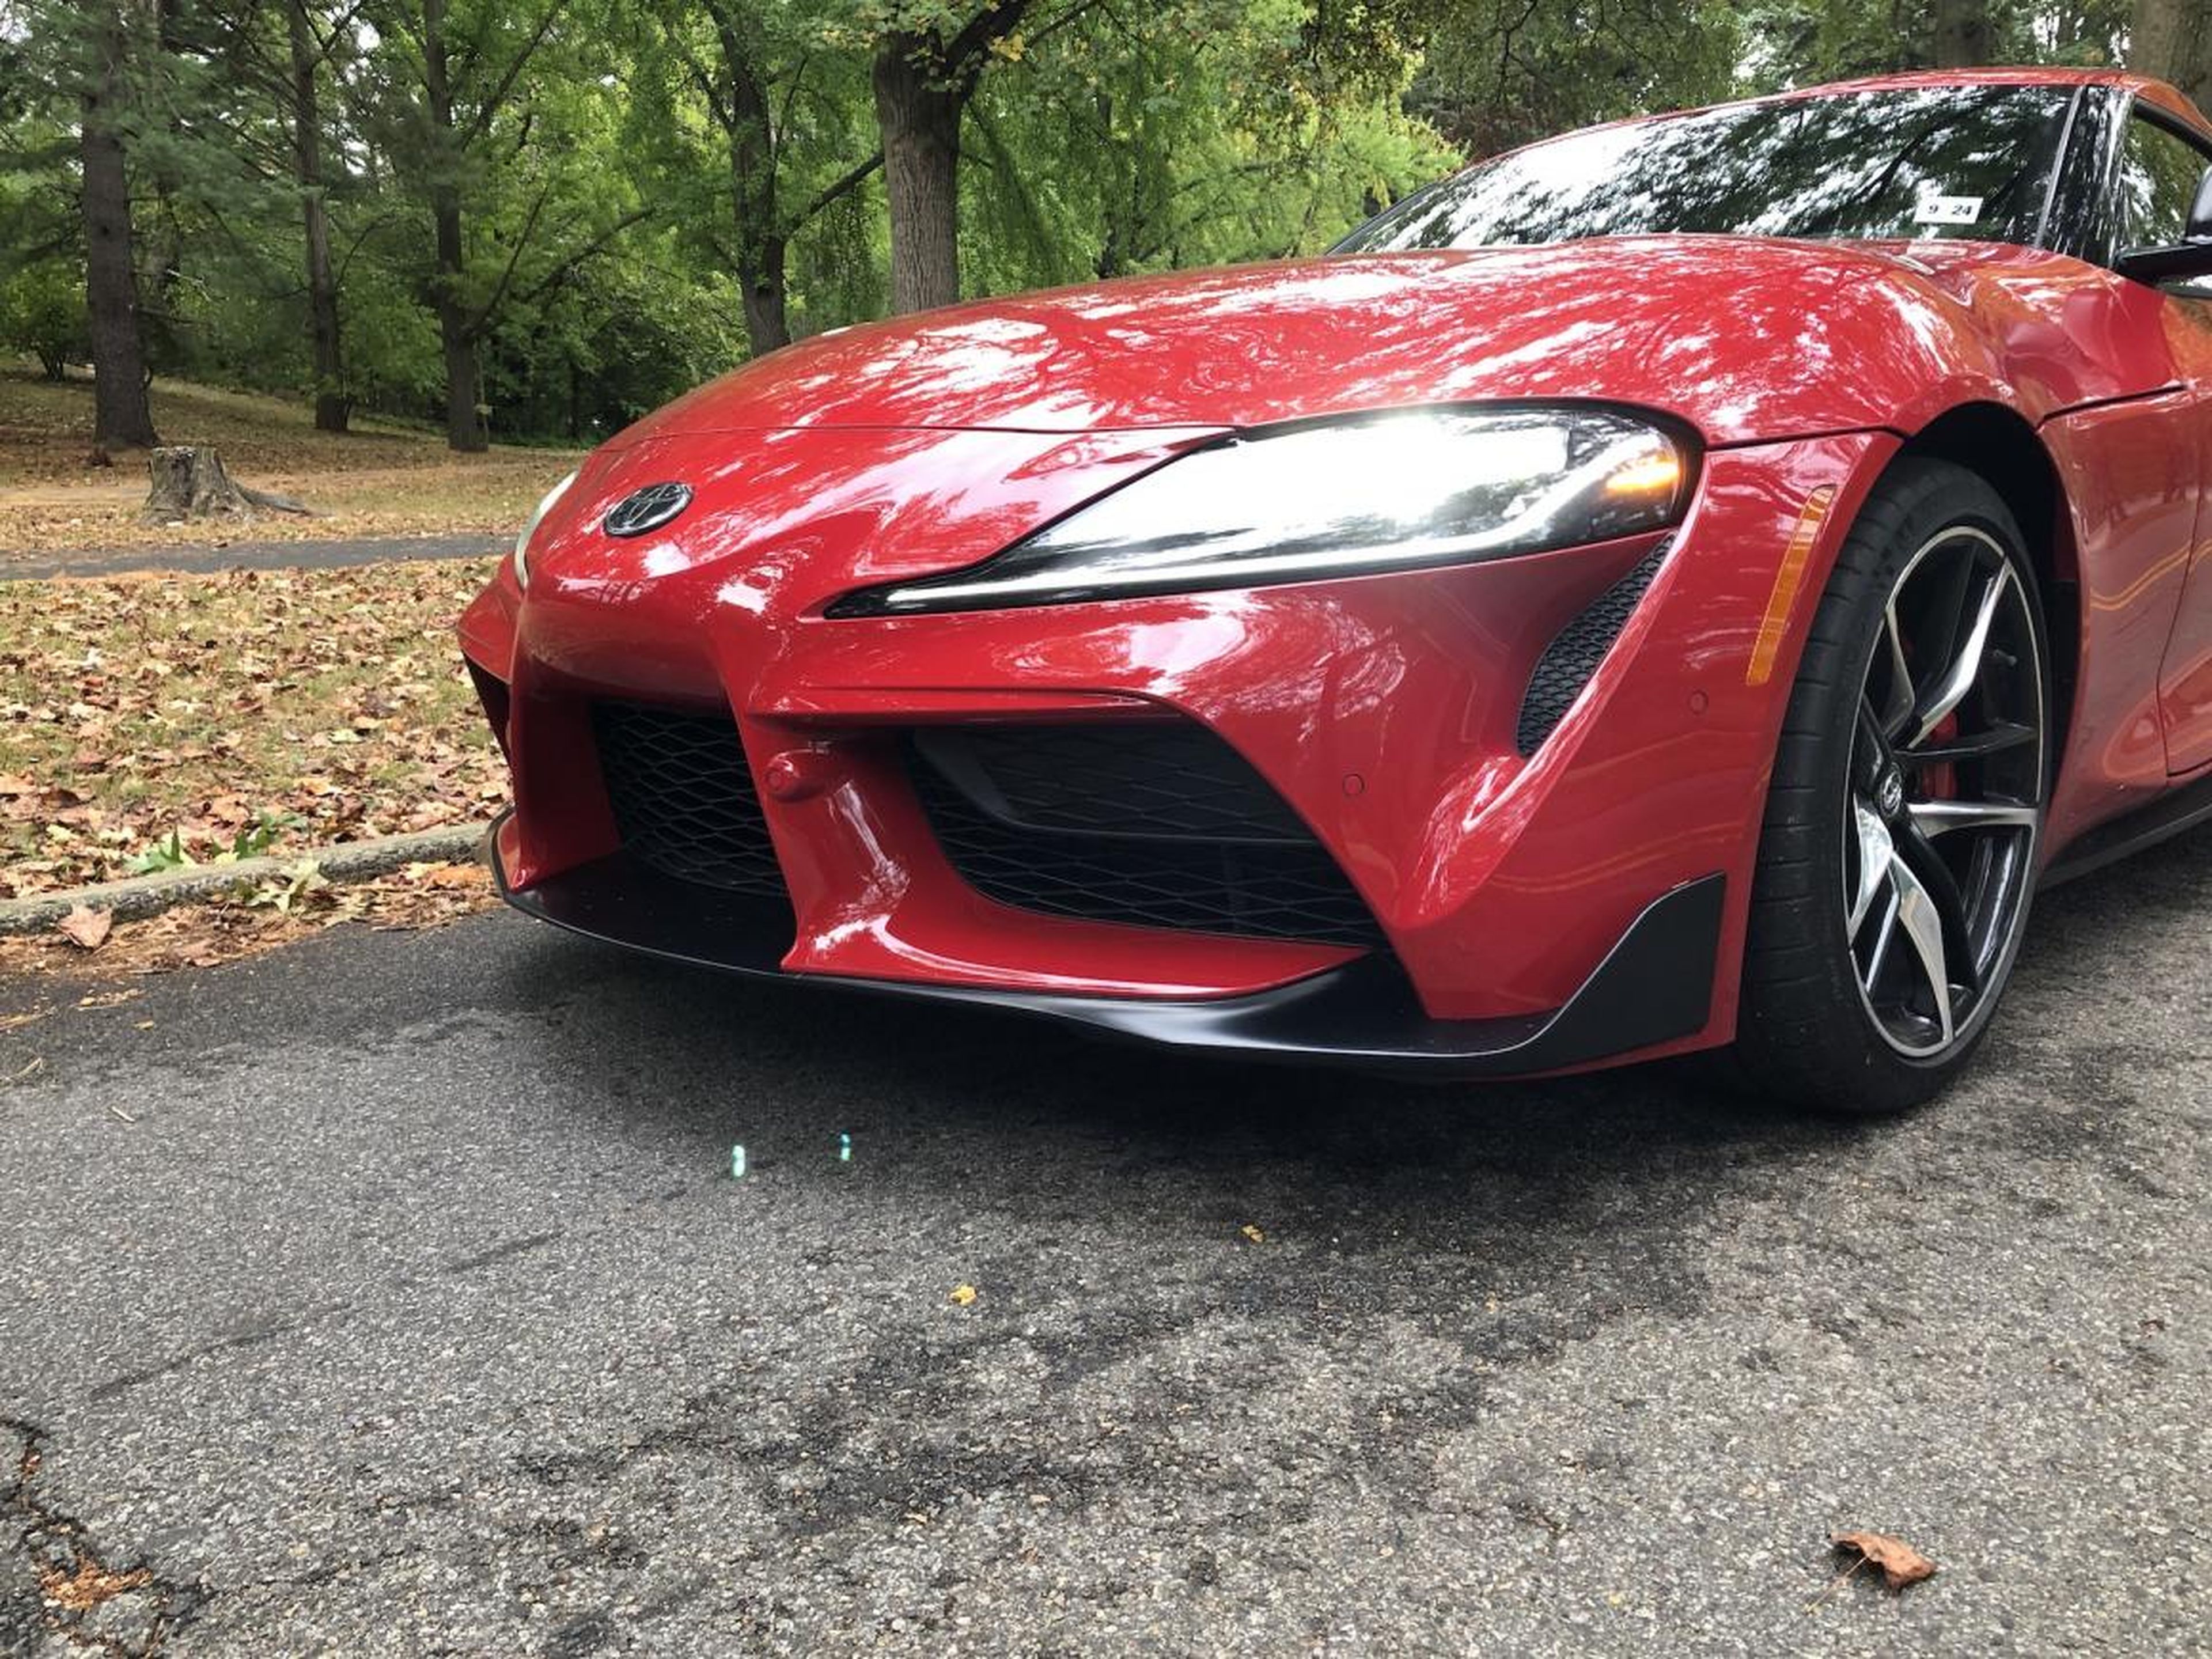 Up front, the aerodynamic tech is unobtrusive, but present. Let's just say that I didn't have to ease the Supra in and out of my driveway for fear of cracking something.